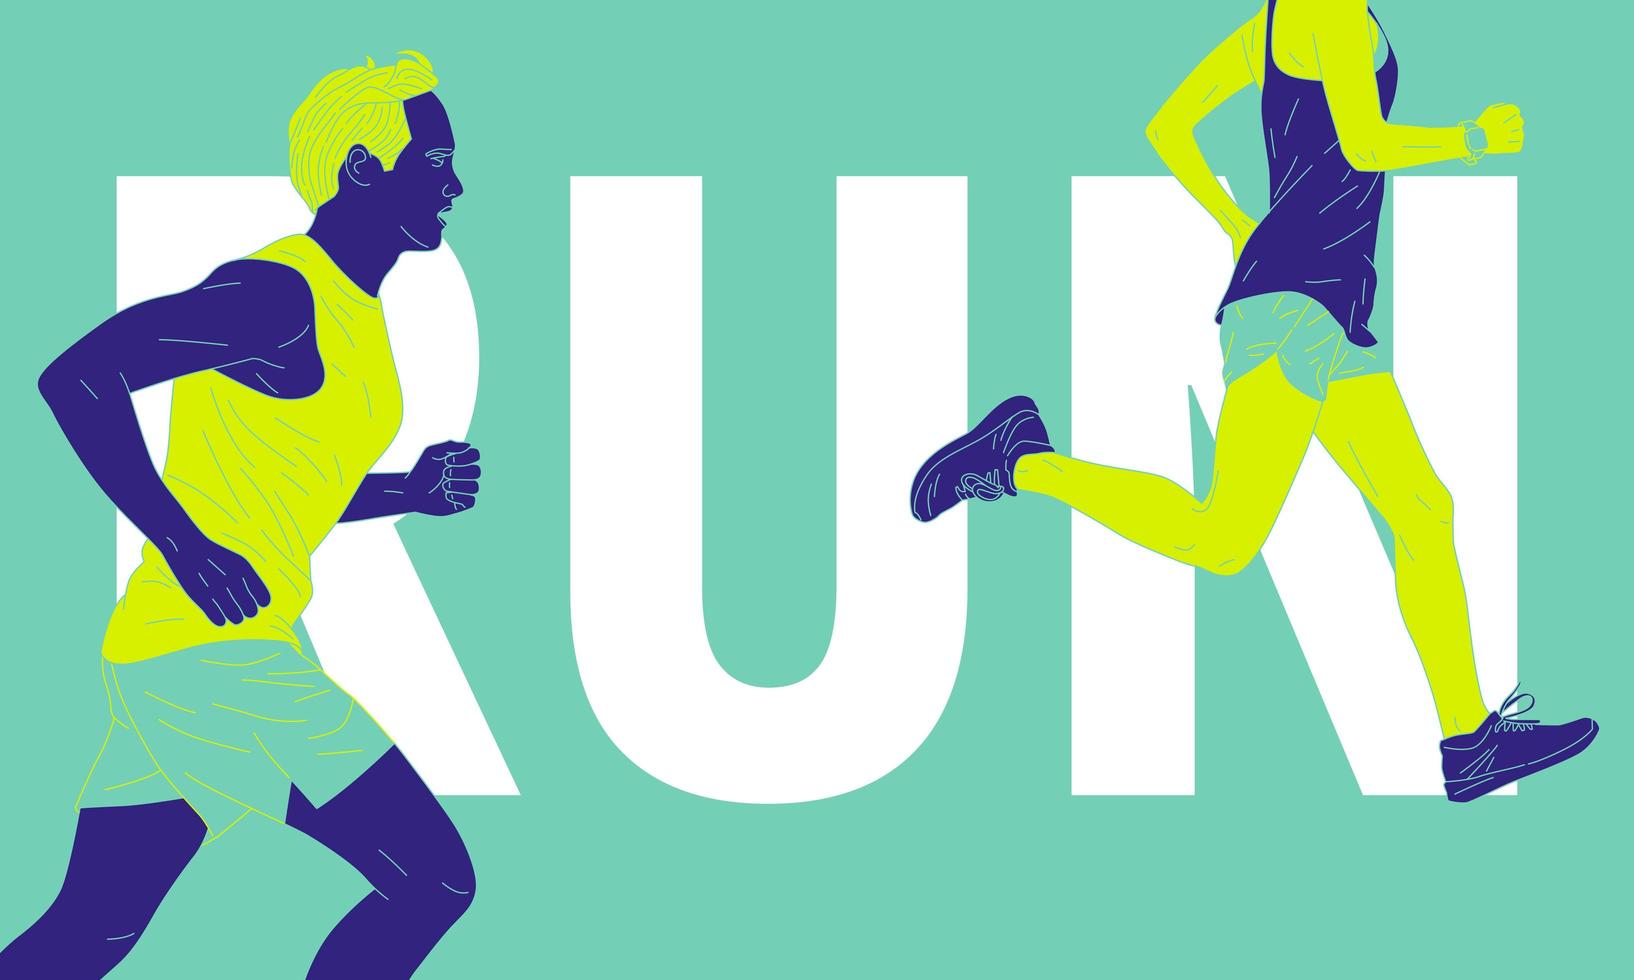 Abstract runners and text vector